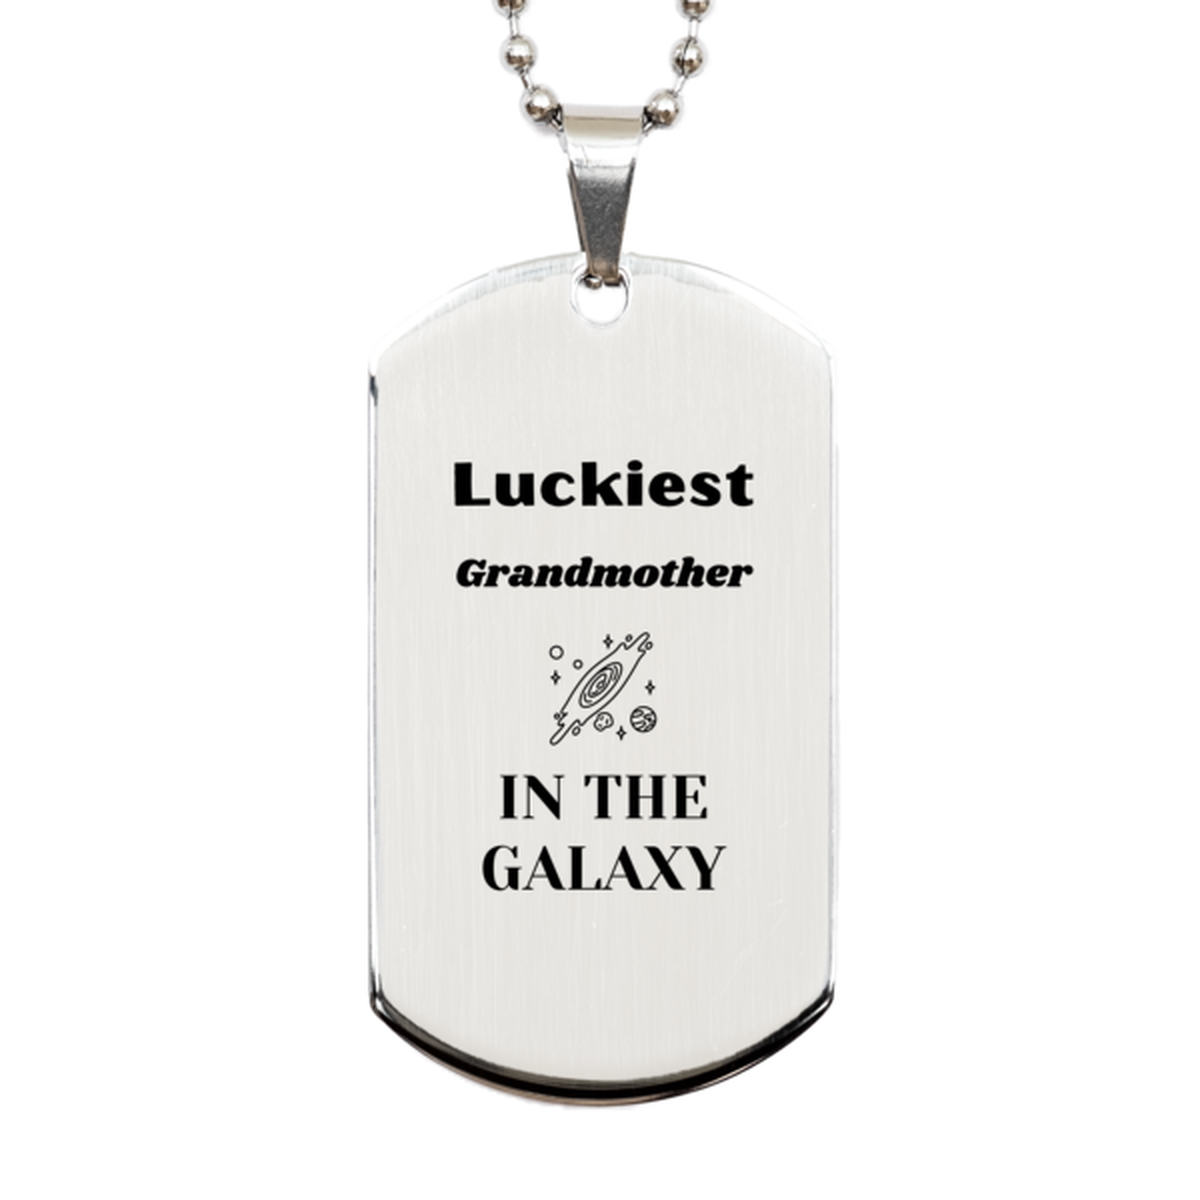 Luckiest Grandmother in the Galaxy, To My Grandmother Engraved Gifts, Christmas Grandmother Silver Dog Tag Gifts, X-mas Birthday Unique Gifts For Grandmother Men Women